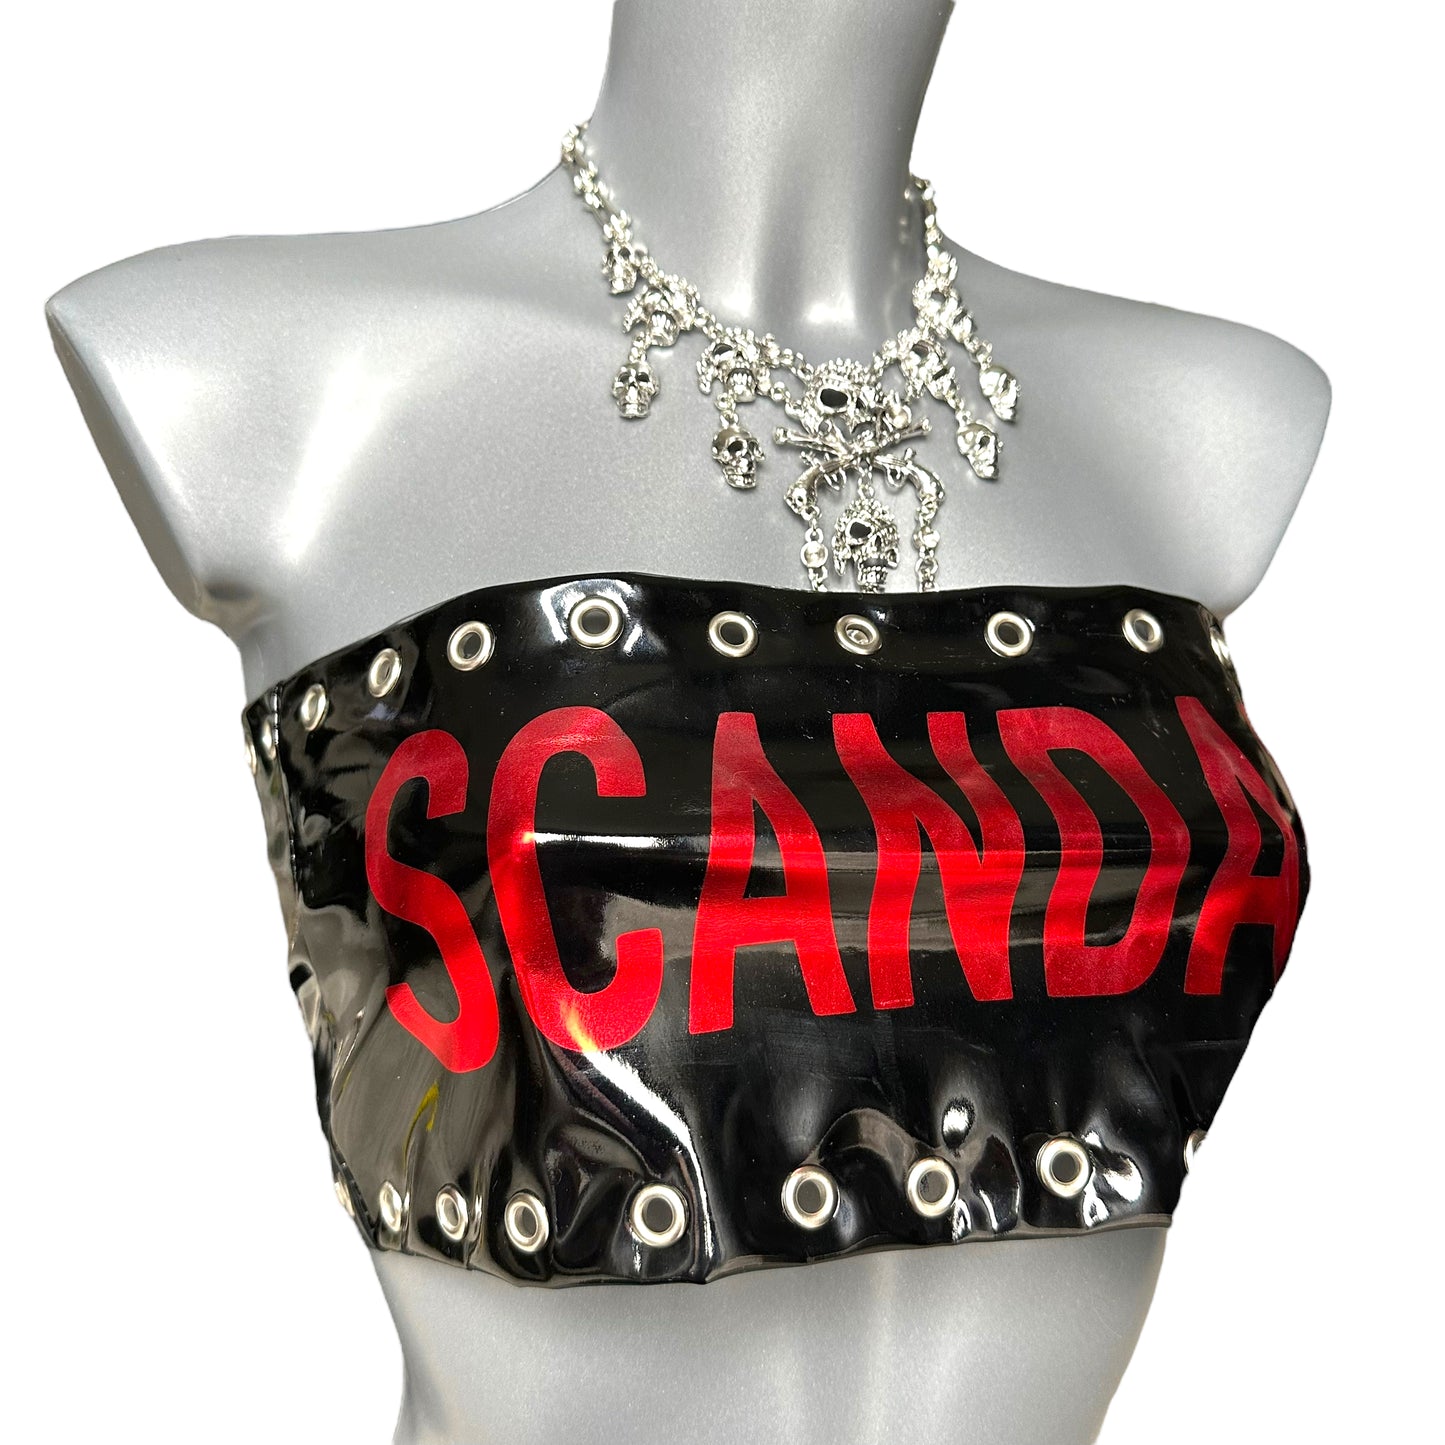 Authentic Jean Paul Gaultier Scandal Bag Reworked into a Black PVC Tube Top 6 8 10